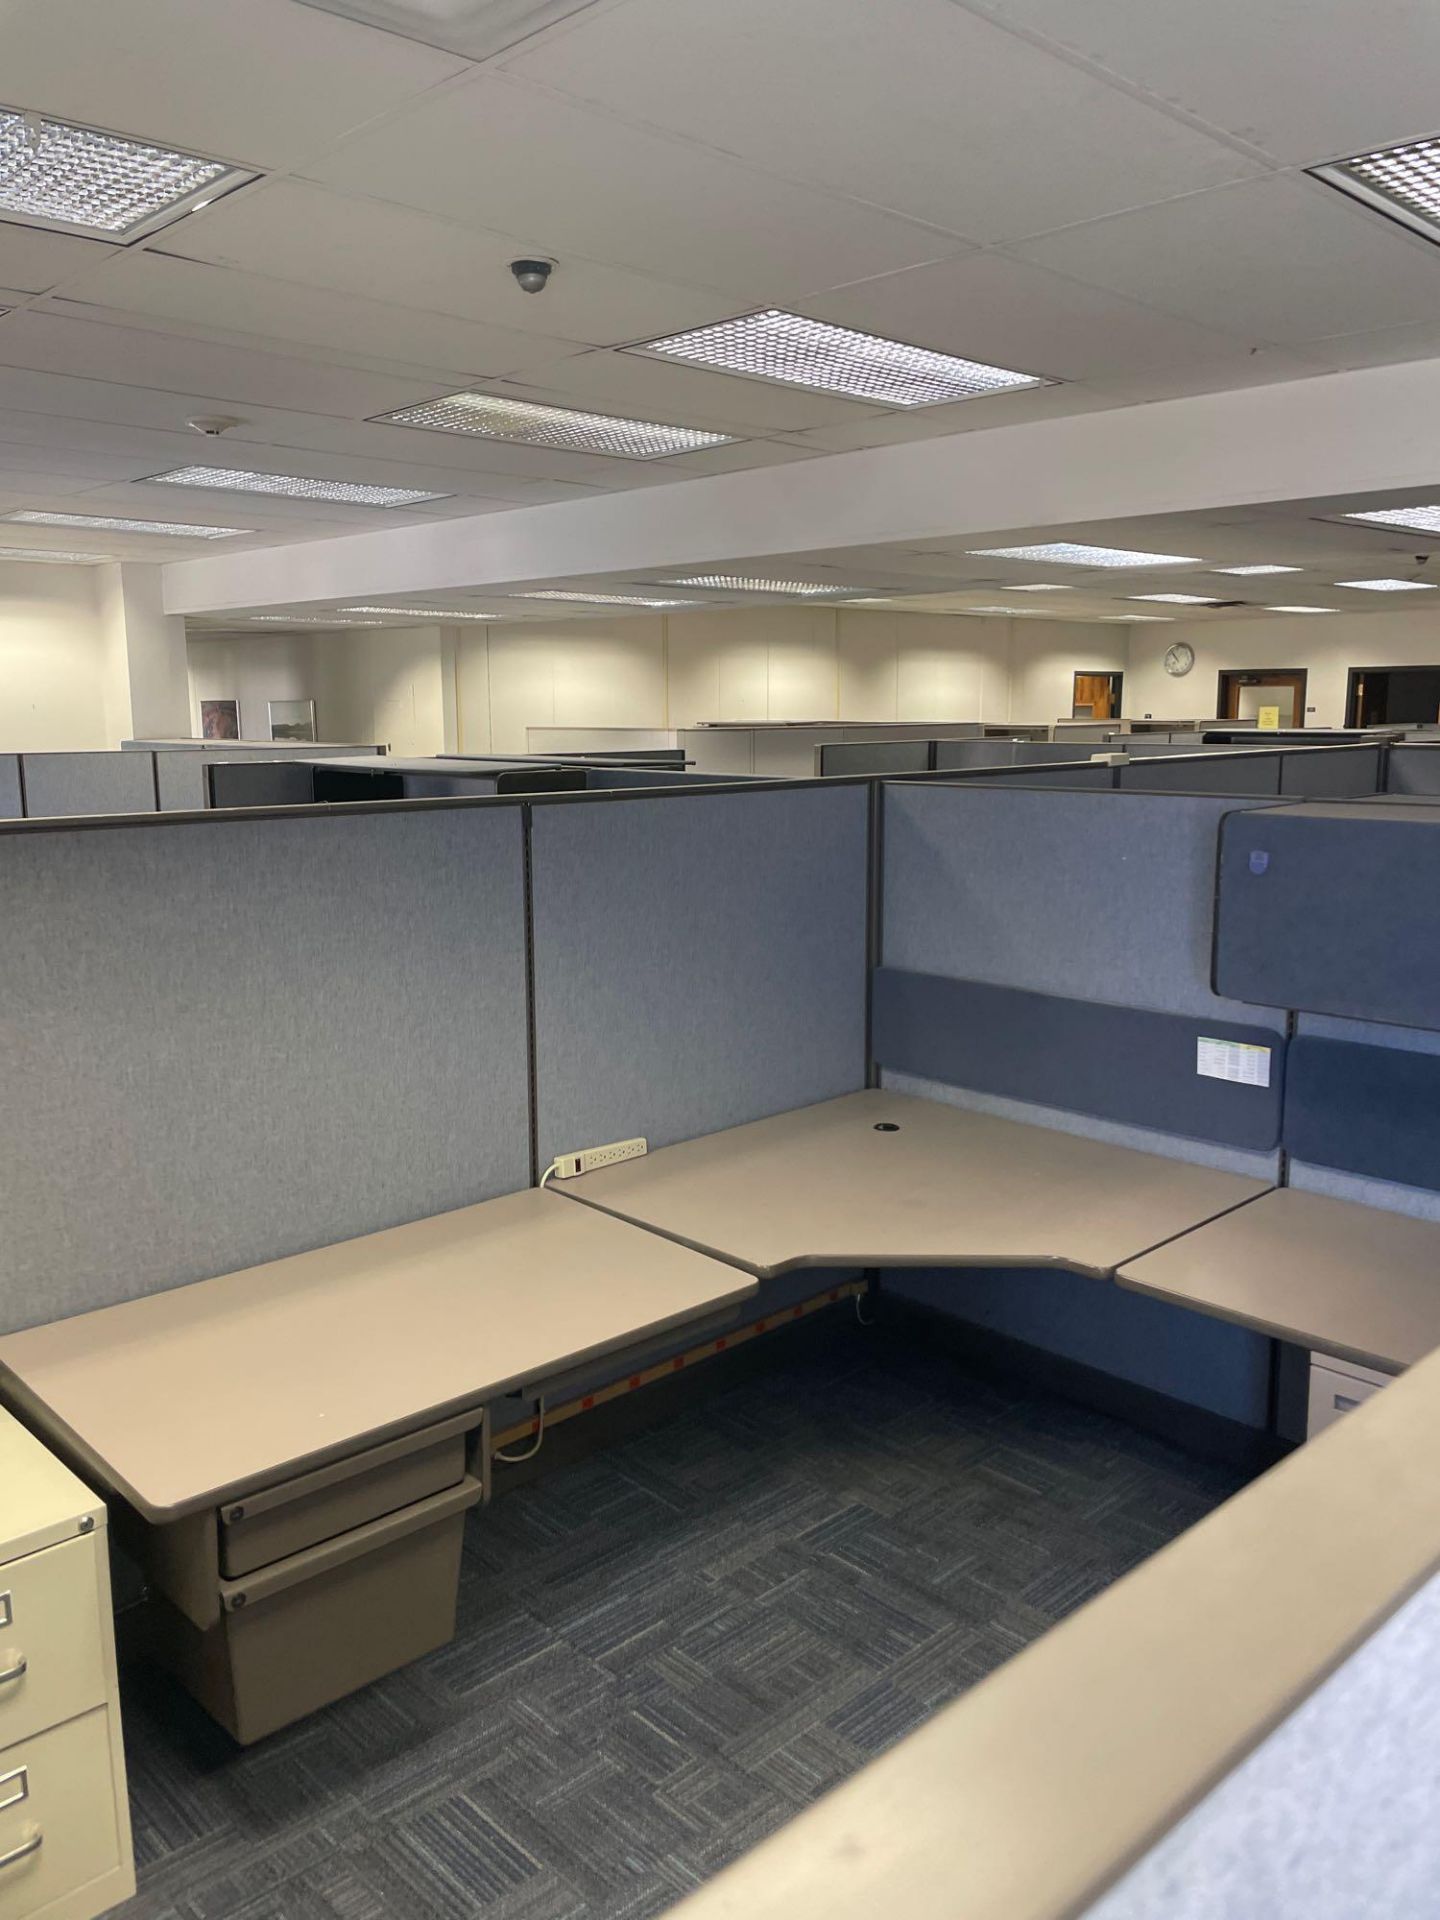 Cubicles, Desks, & Chairs - Image 7 of 7